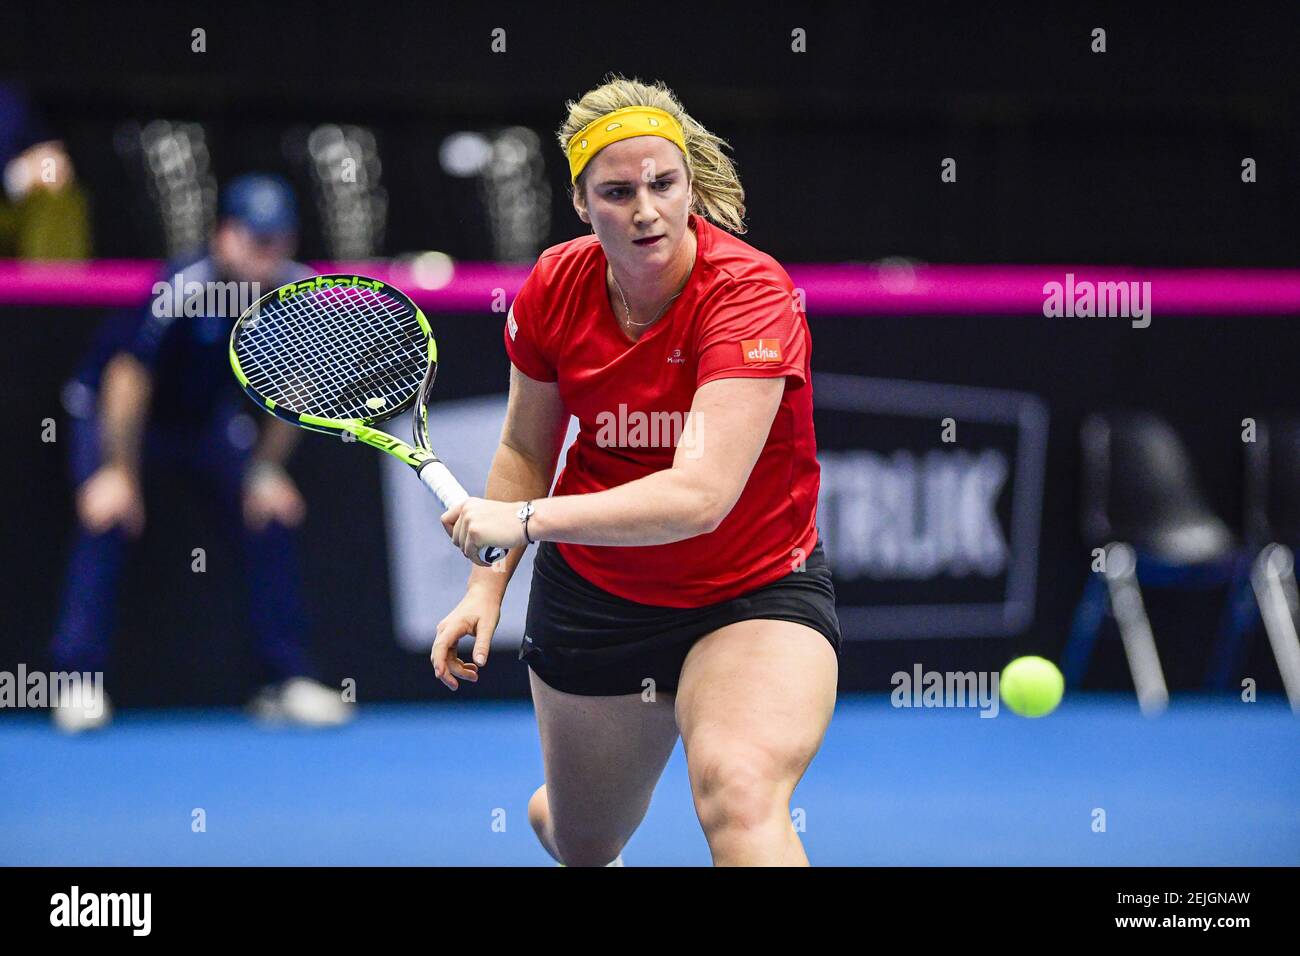 Belgian Ysaline Bonaventure pictured in action during the second game  between Belgian Bonaventure (WTA 115) and Kazach Putinseva (WTA 34) on the  first day of the Fed Cup Qualifiers first round between